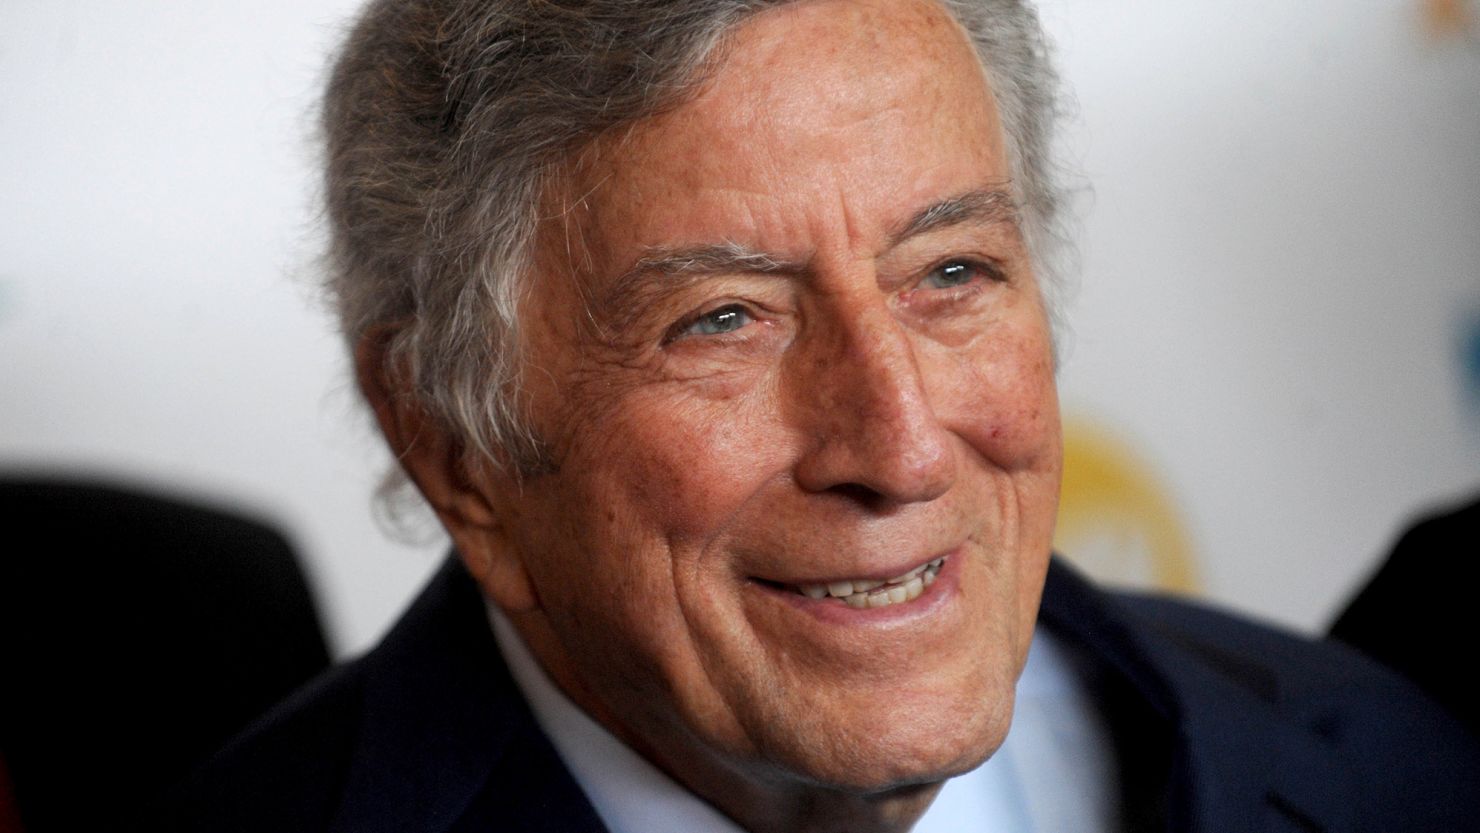 Tony Bennett arrives for his 90th birthday celebration held in 2016 at The Rainbow Room in New York City.